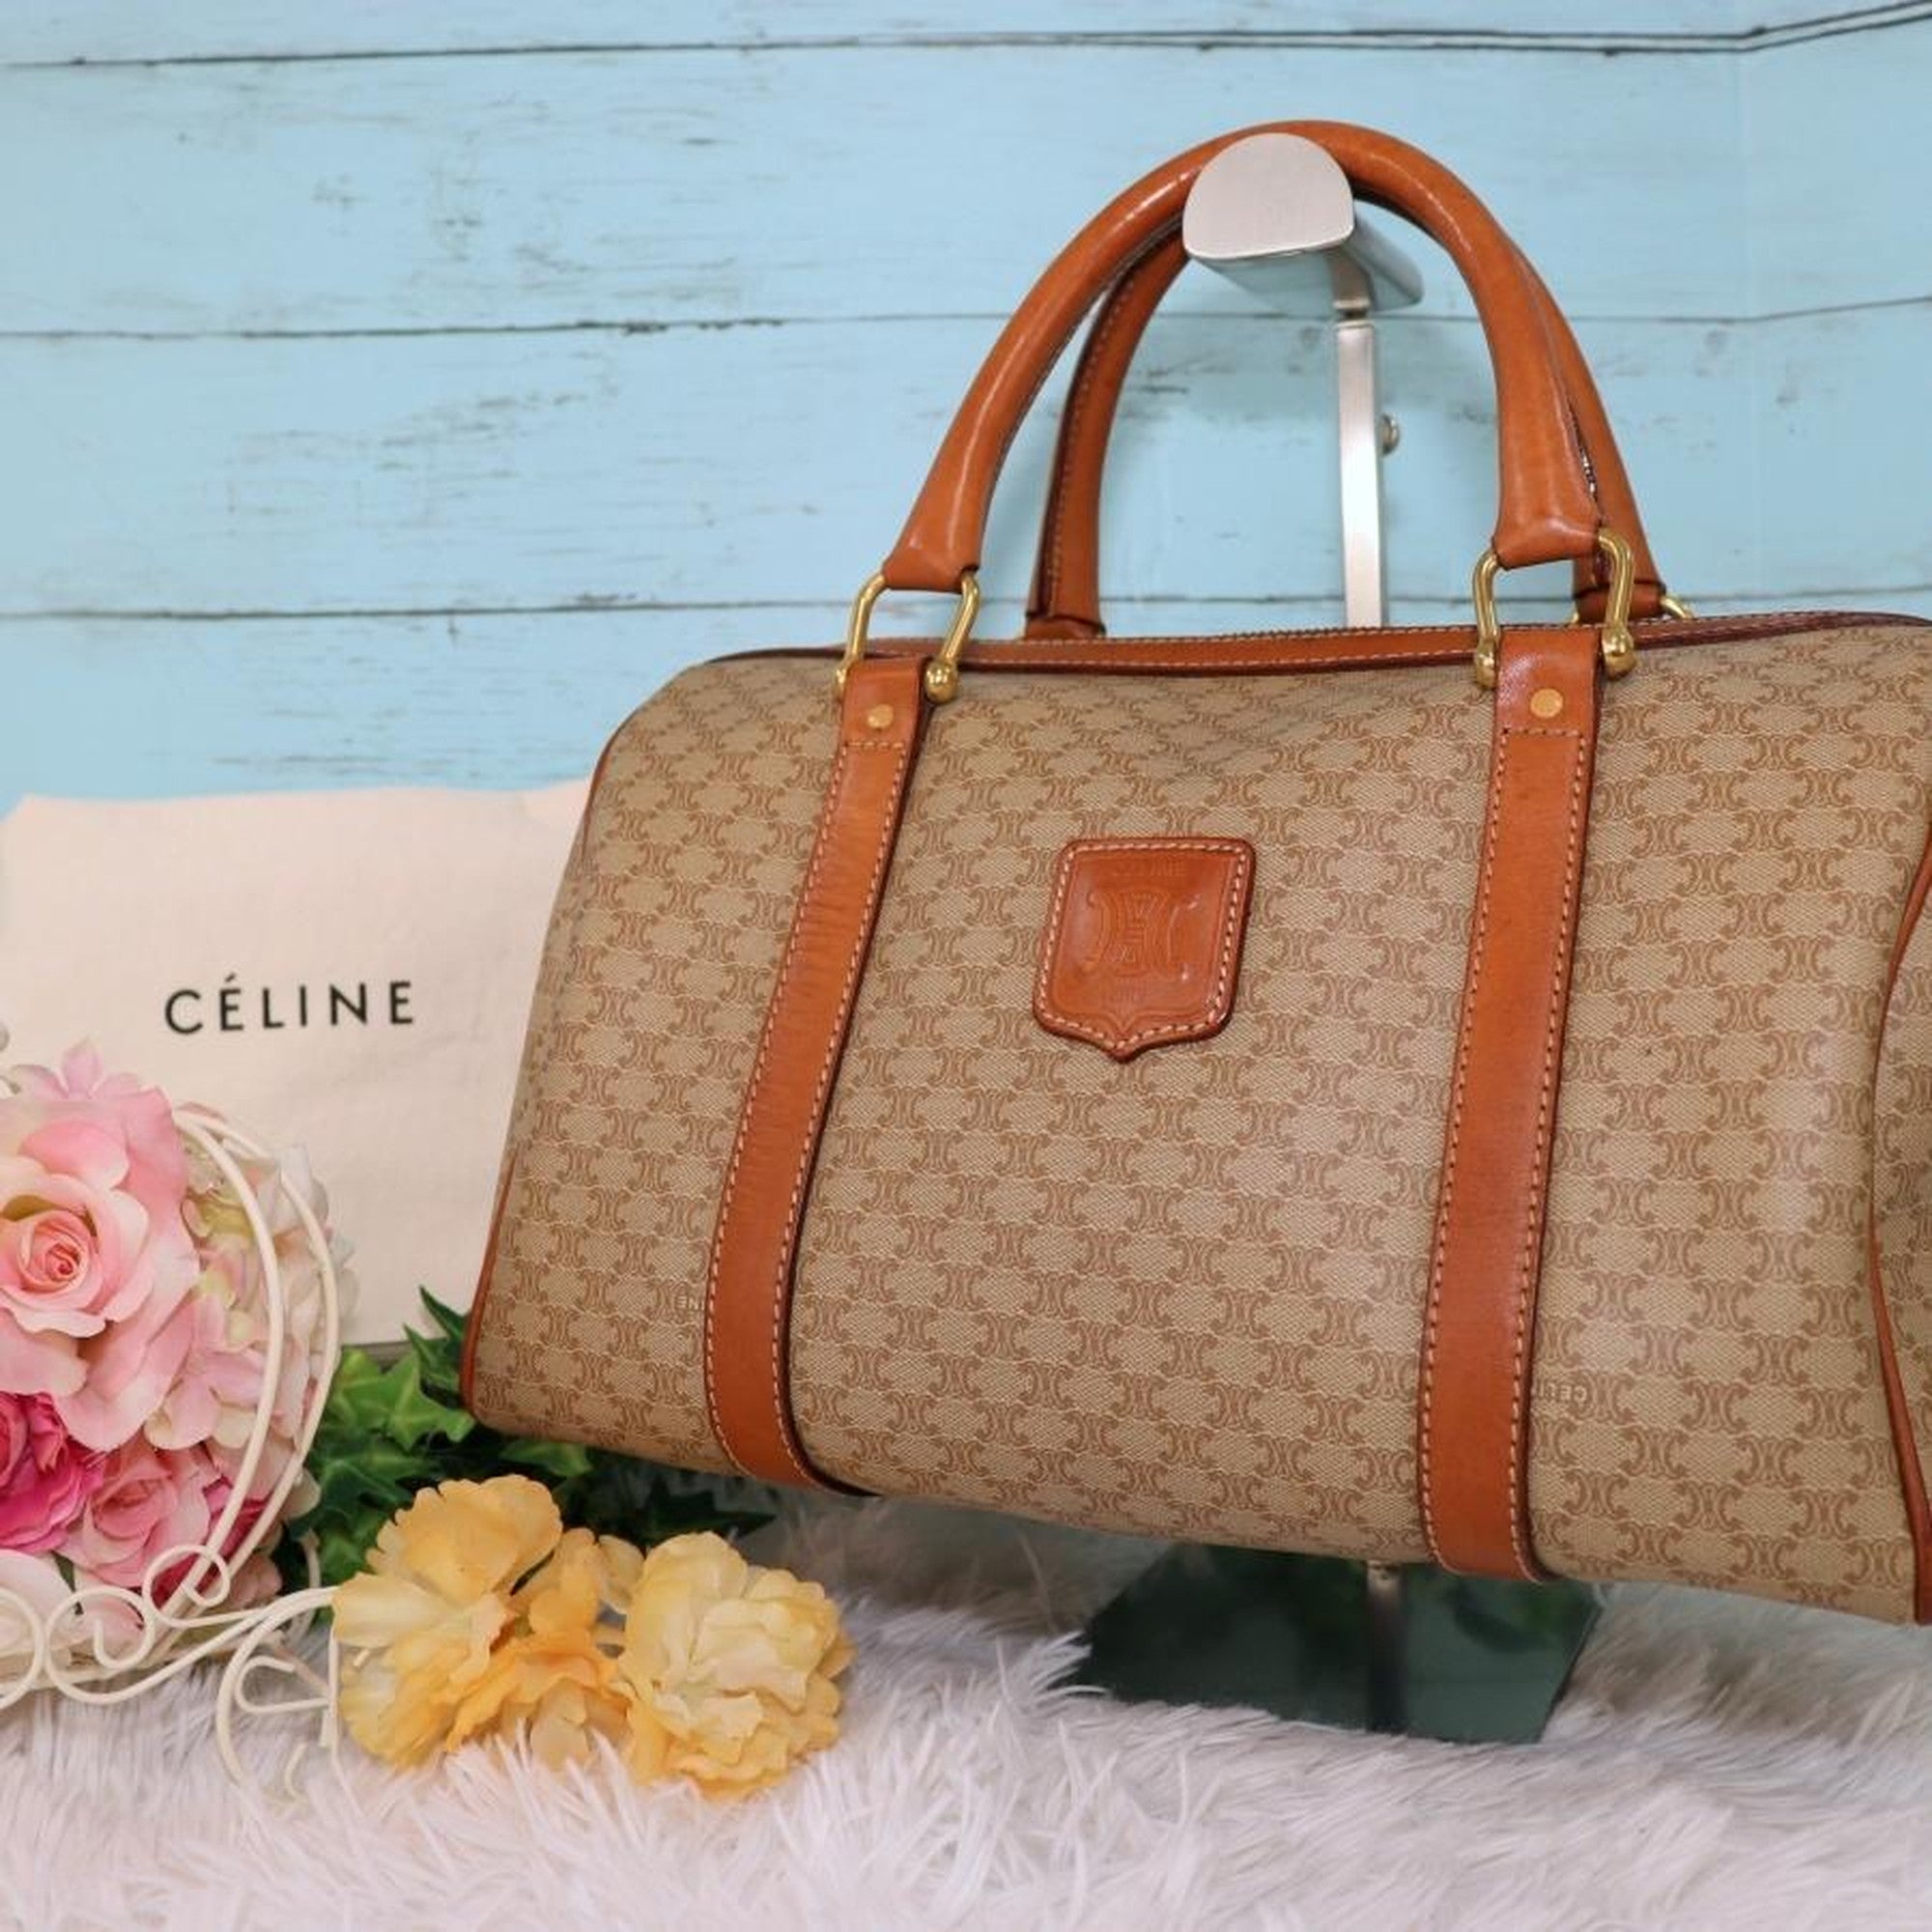 OLD Céline レア　????　ワンピース